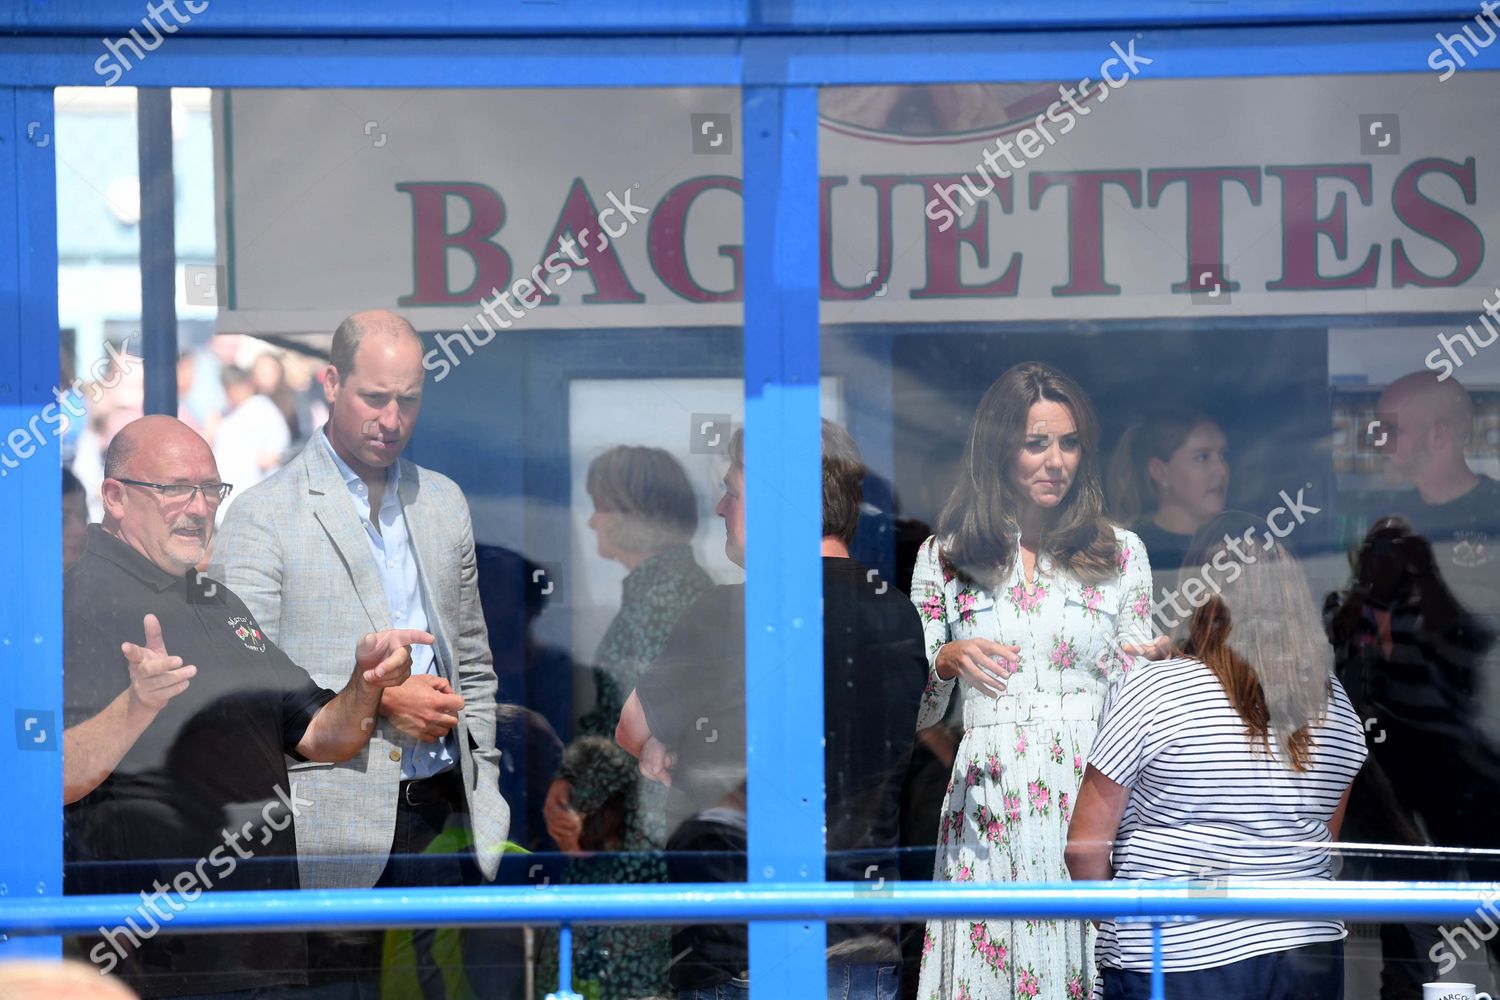 prince-william-and-catherine-duchess-of-cambridge-visit-to-barry-island-wales-uk-shutterstock-editorial-10733869aa.jpg